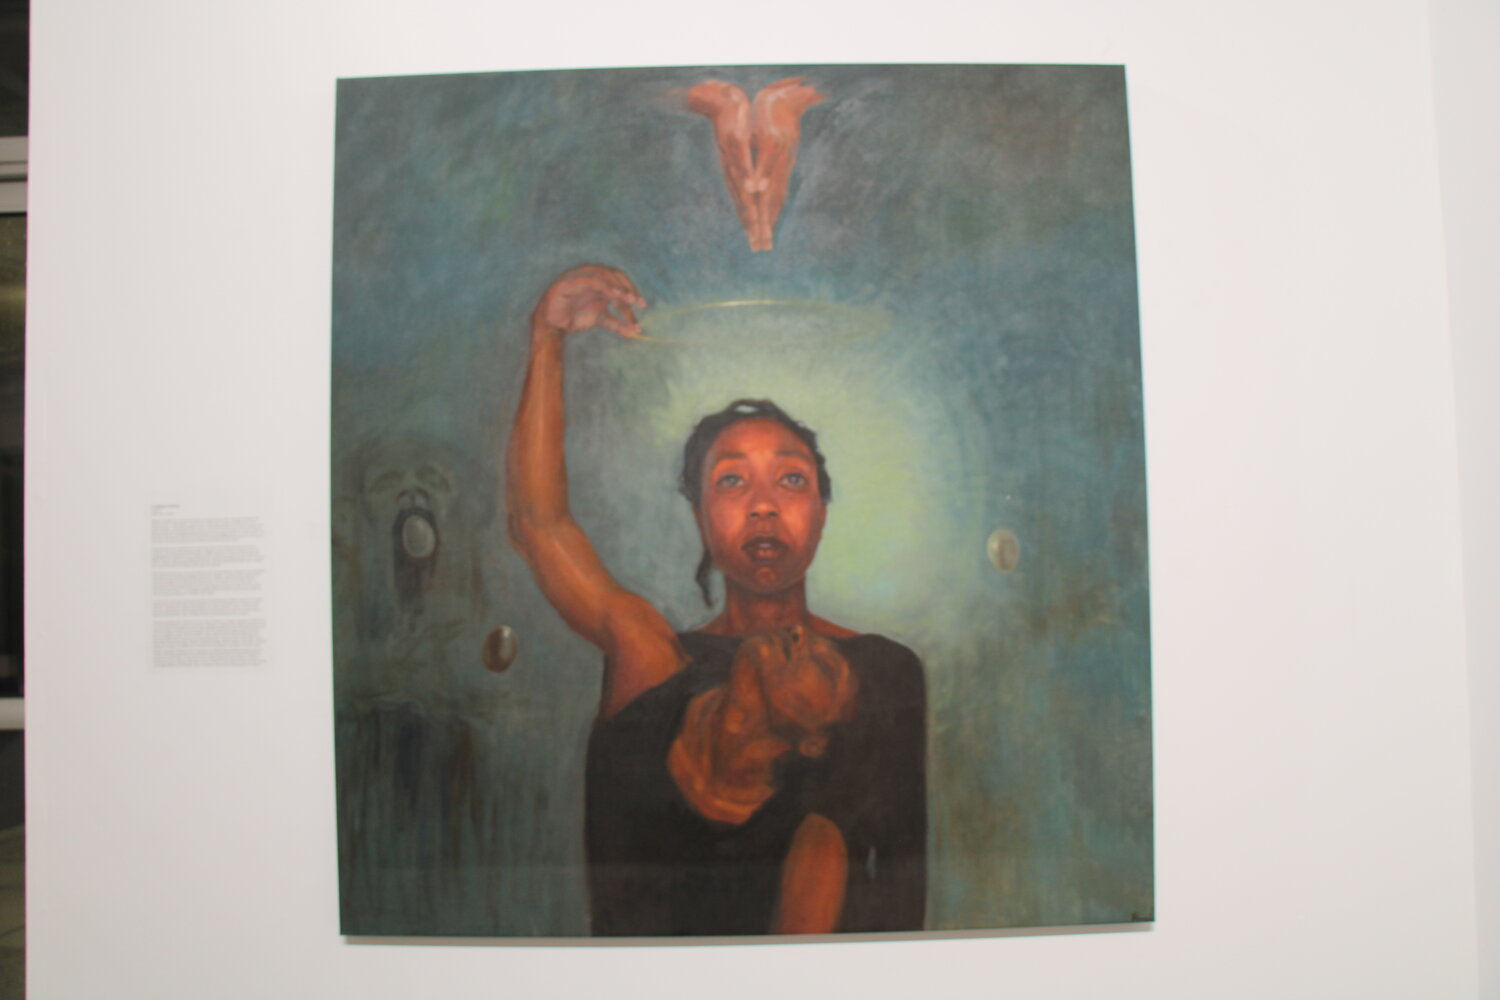 “Untitled” by Florence Wangui, a Kenyan artist has “largely gone about her work in quiet solitude.” The stark, yet warming portrait shows a young woman in flux with herself, possibly haunted with the vague figure on the left and hopefully absolved by the halo and praying hands above her.